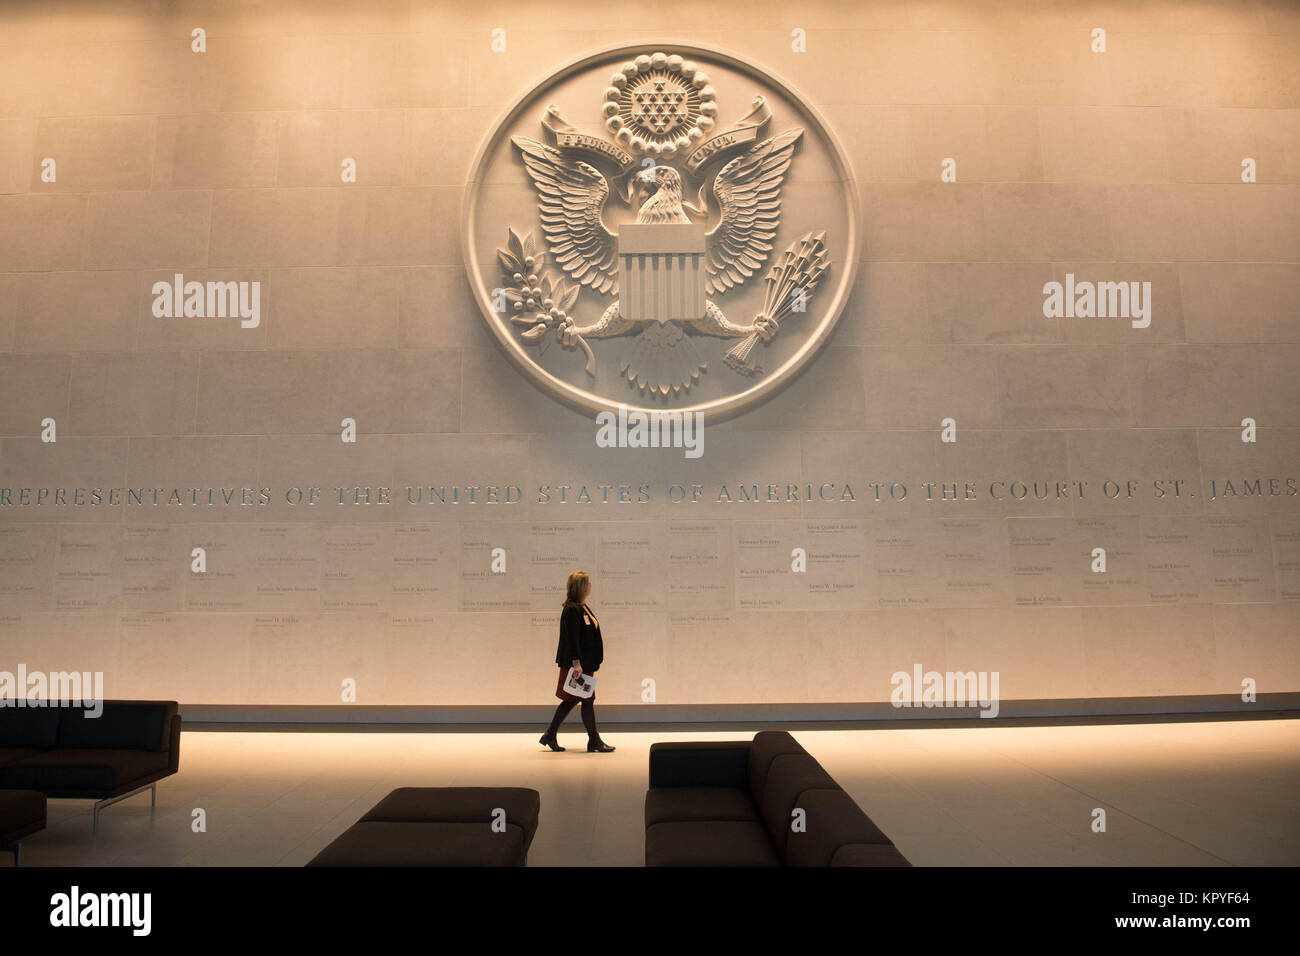 Review of the Year 2017: December: A woman walks beneath a giant cast of the Great Seal of the United States, (used to authenticate certain documents issued by the US federal government), inside the new US Embassy in south London before it opens for business in January 2018. Stock Photo